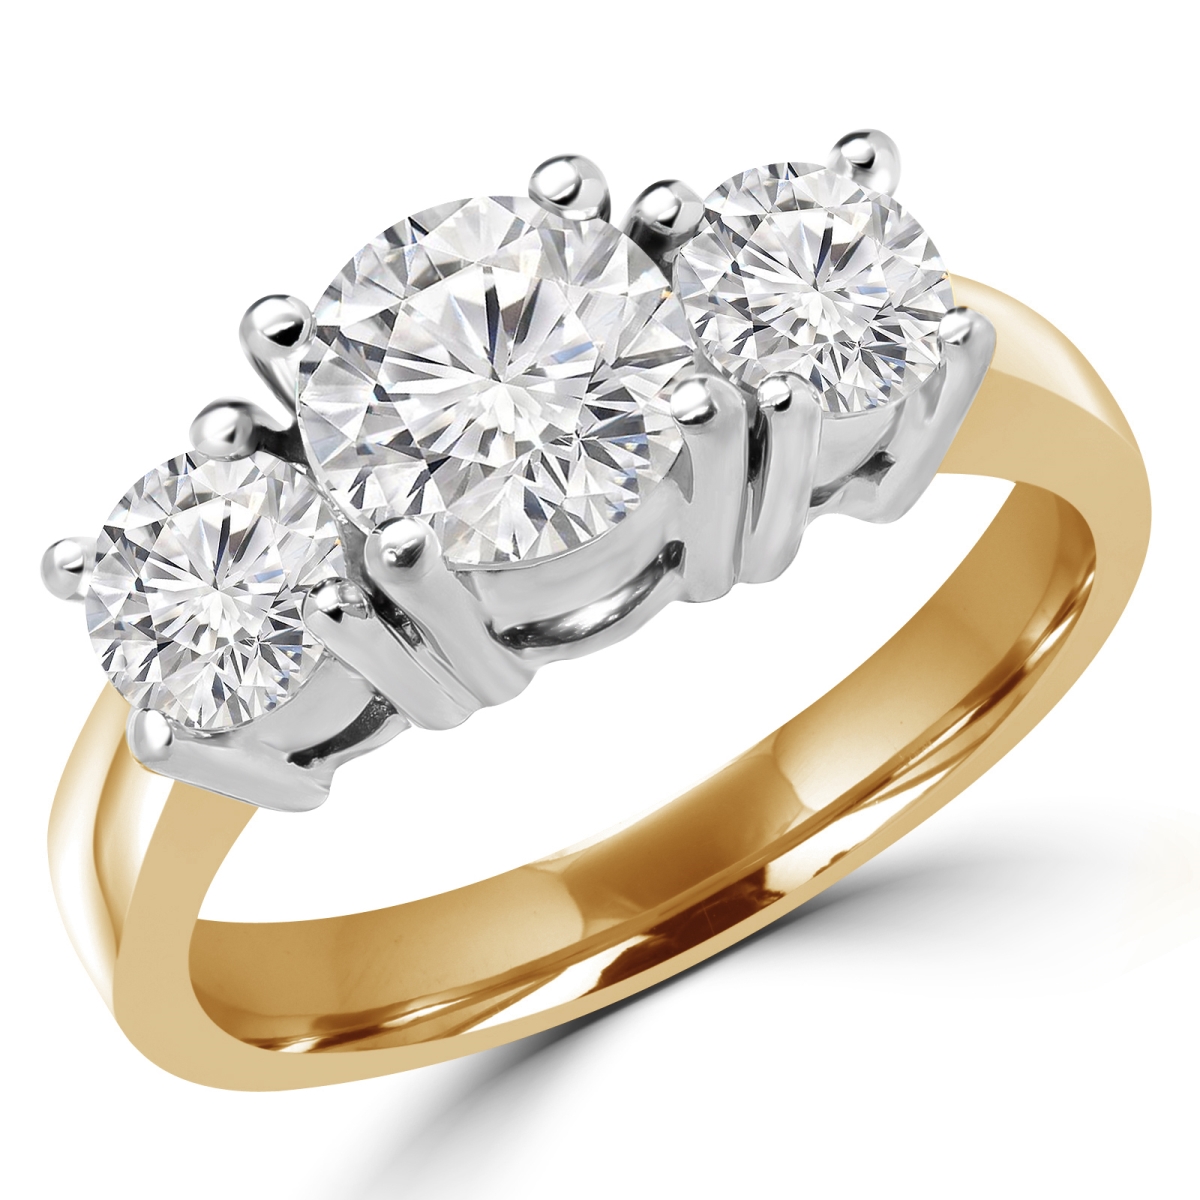 Picture of Majesty Diamonds MD170091-3.5 1.1 CTW Round Diamond Three-Stone Engagement Ring in 14K Yellow Gold - Size 3.5